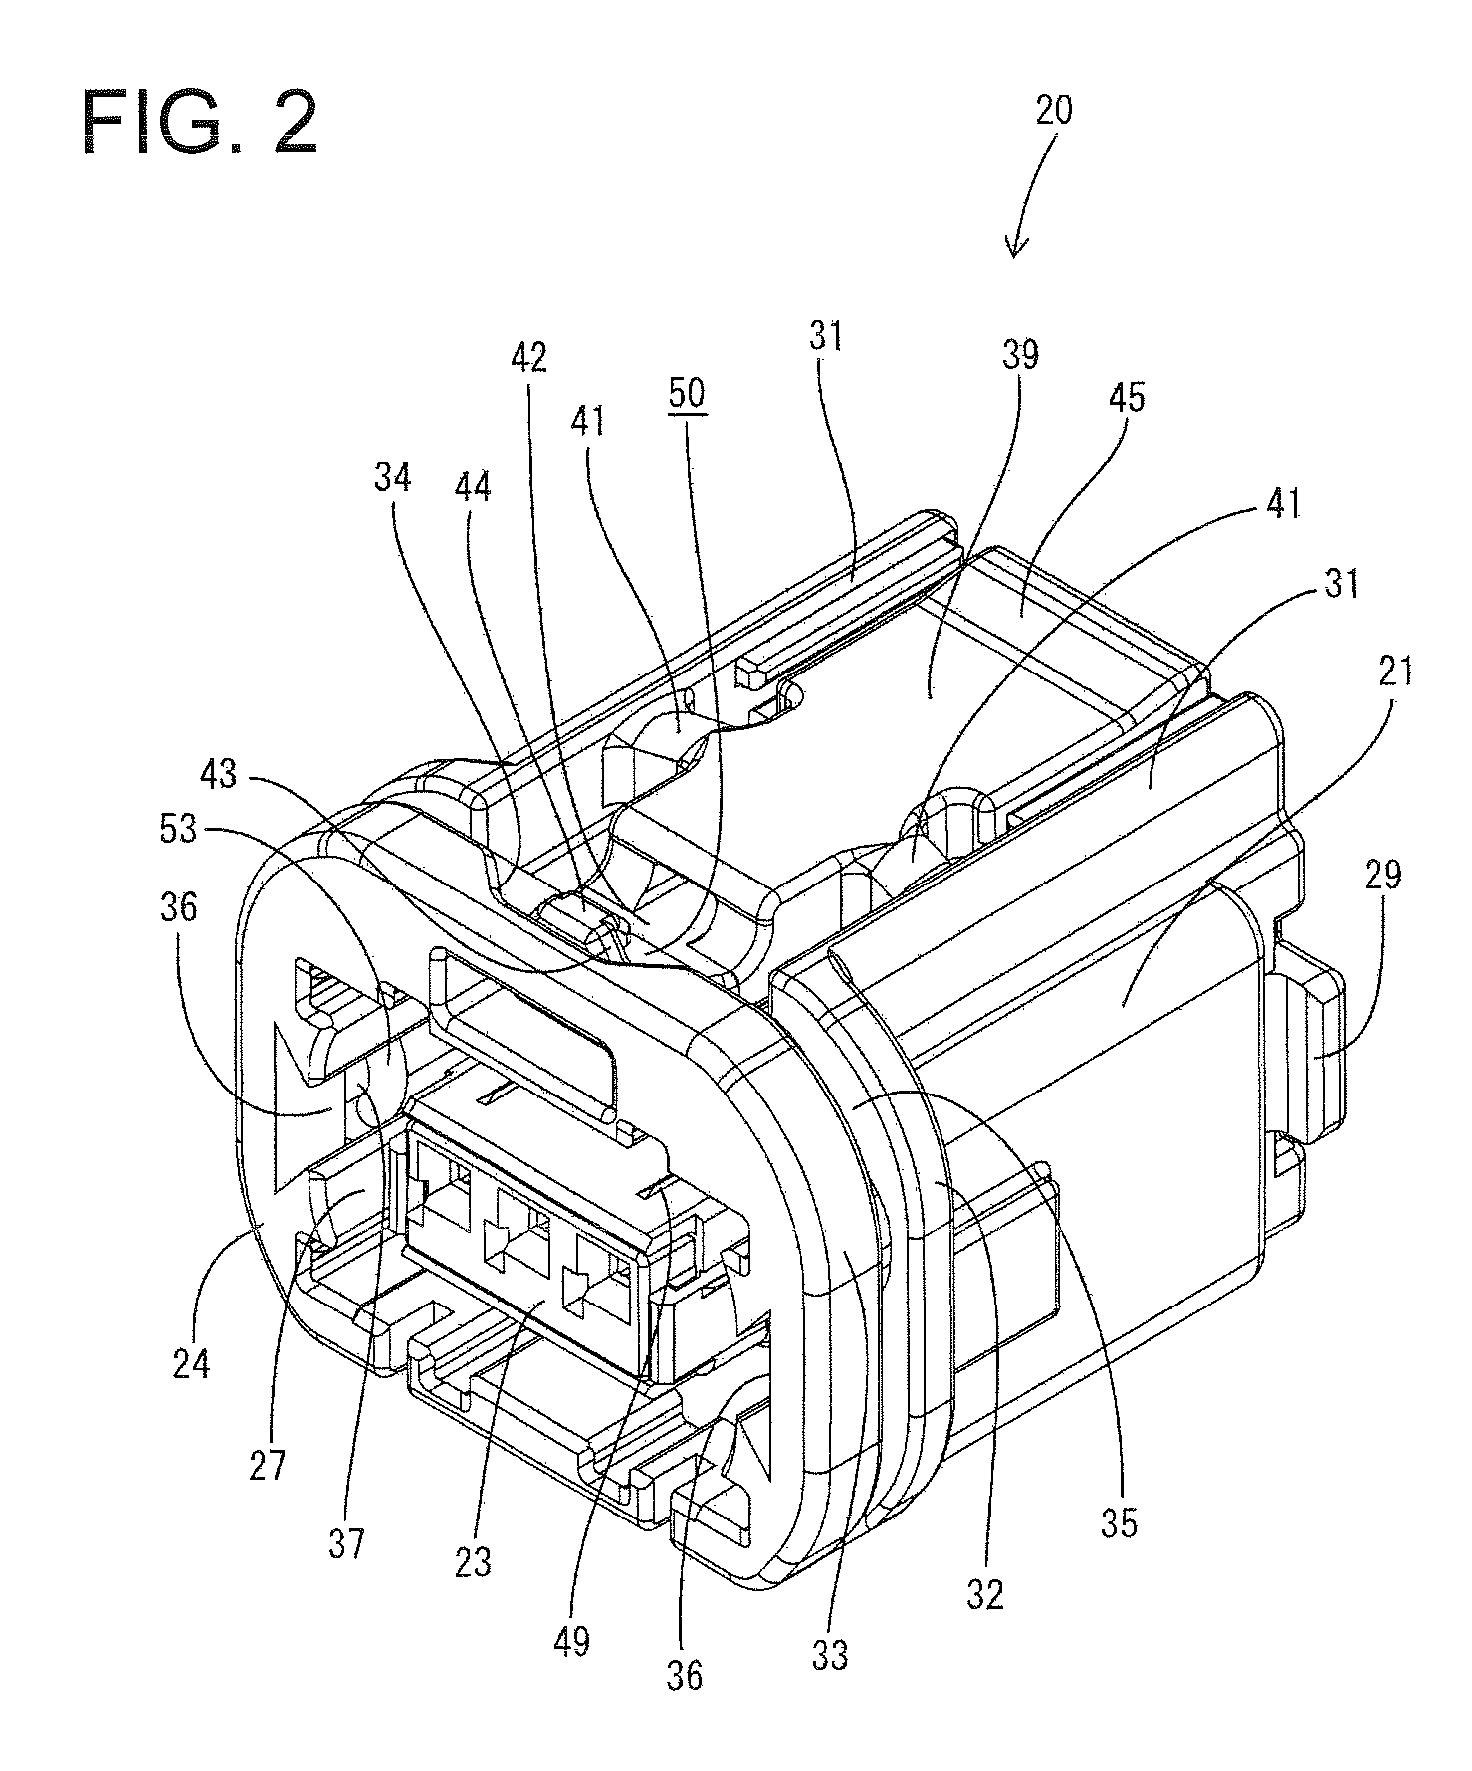 Connector device and locking structure